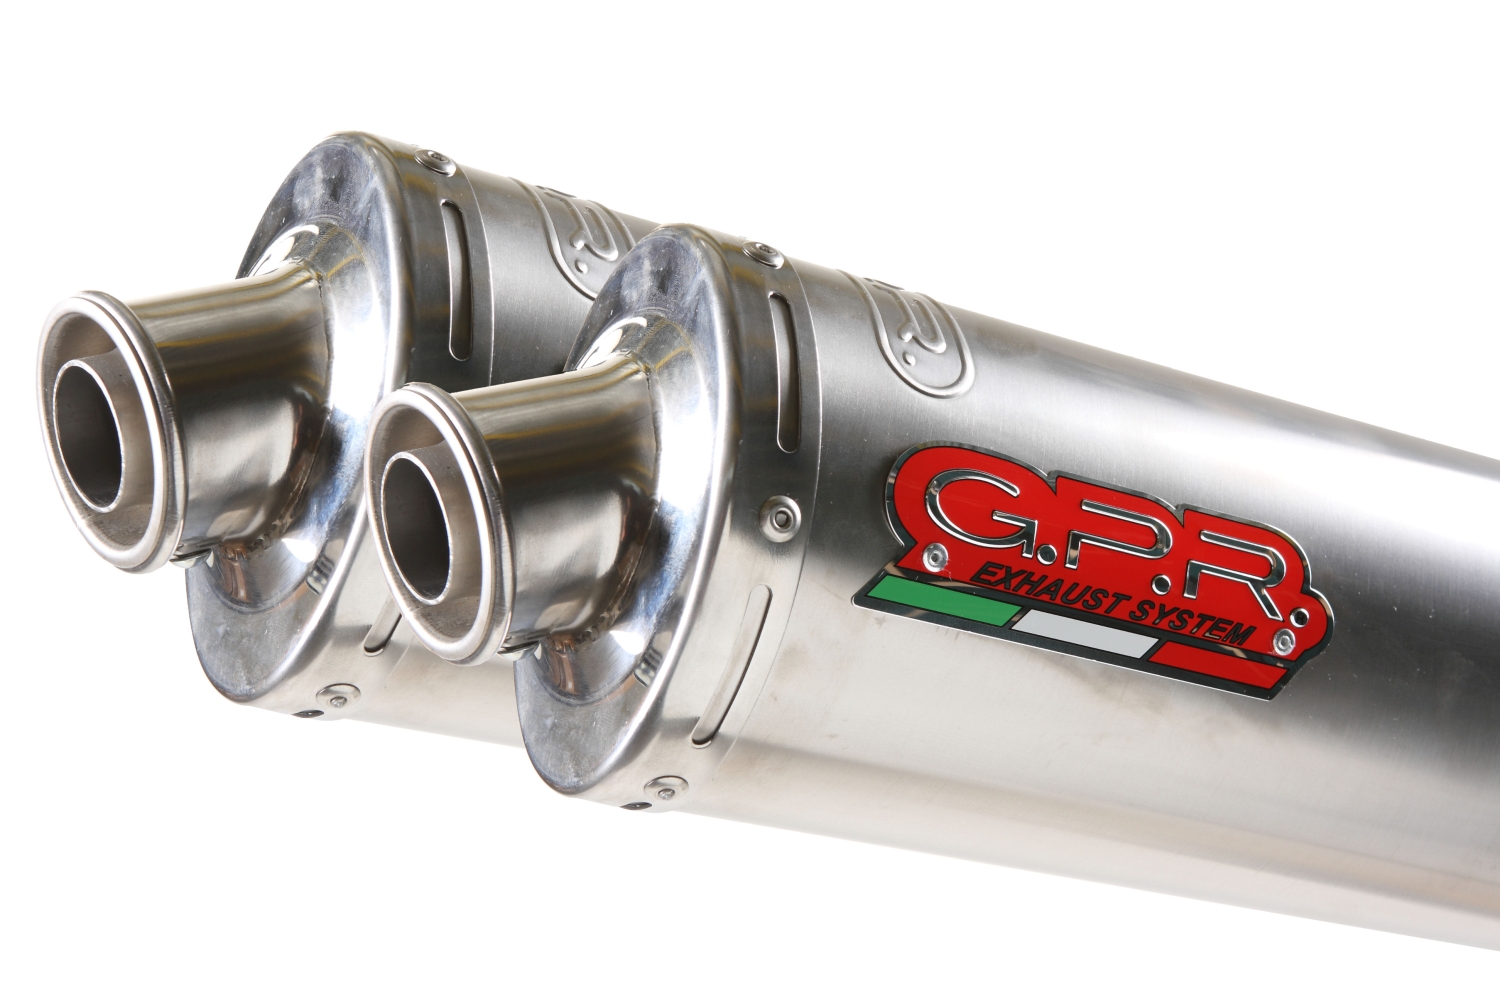 Exhaust system compatible with Kawasaki GPZ 500 - S 1988-2003, Inox Tondo / Round, Dual Homologated legal slip-on exhaust including removable db killers and link pipes 